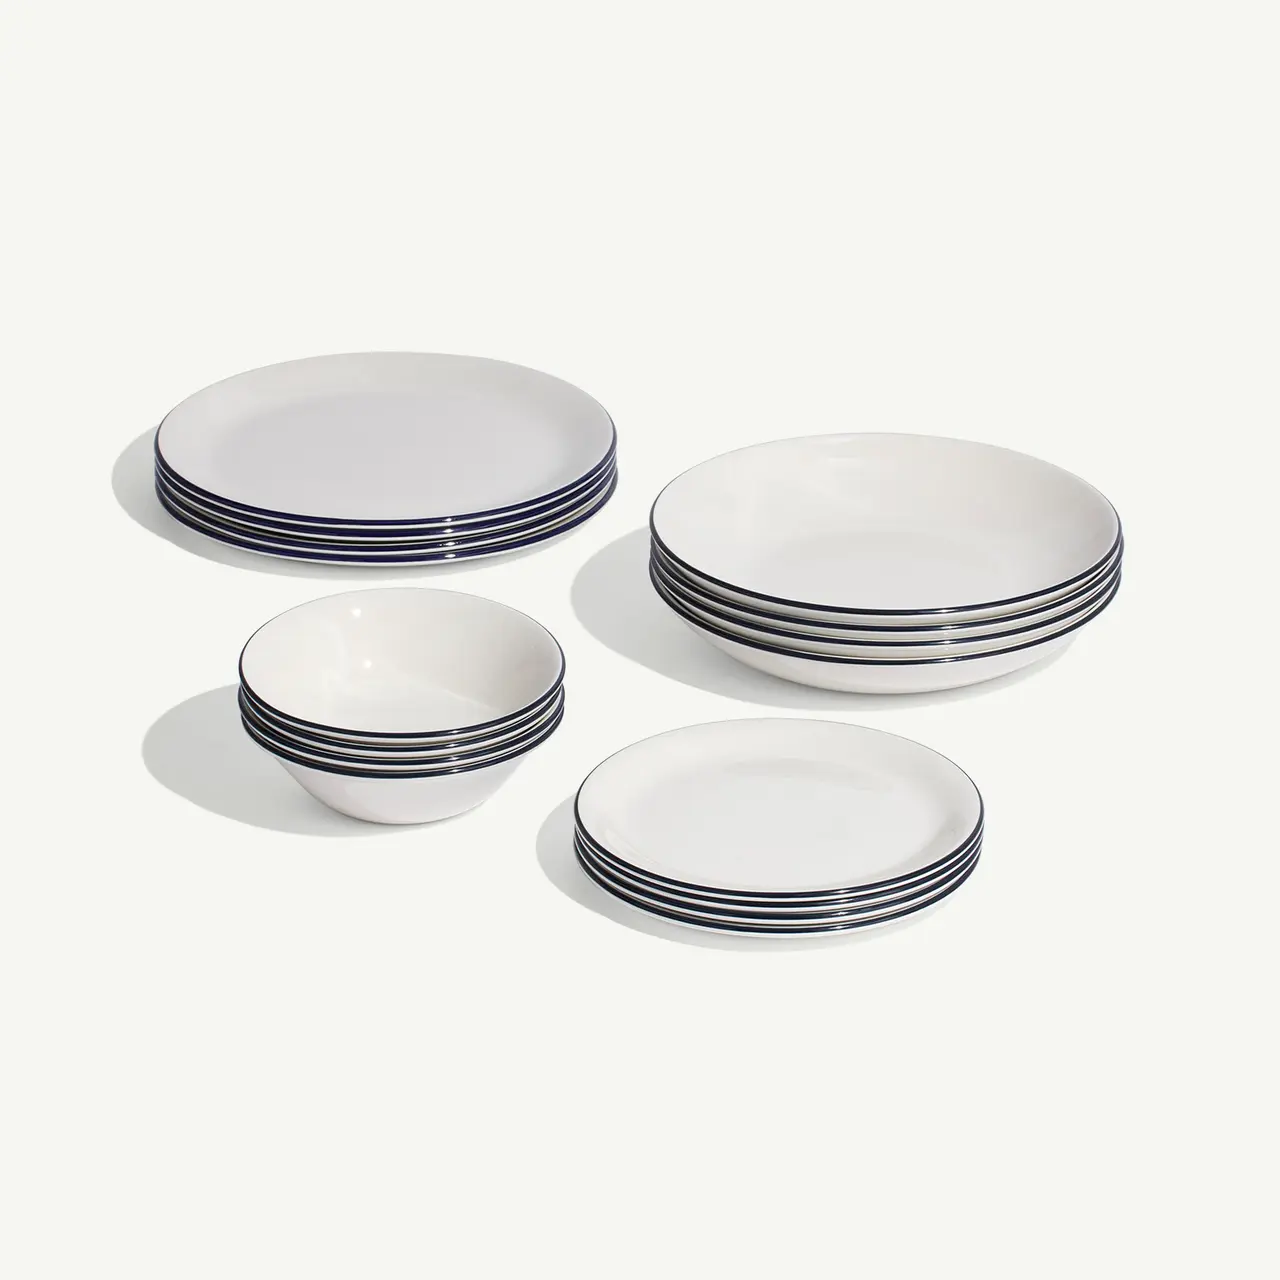 A set of white dishes with blue trim, including plates and bowls, arranged neatly on a light background.